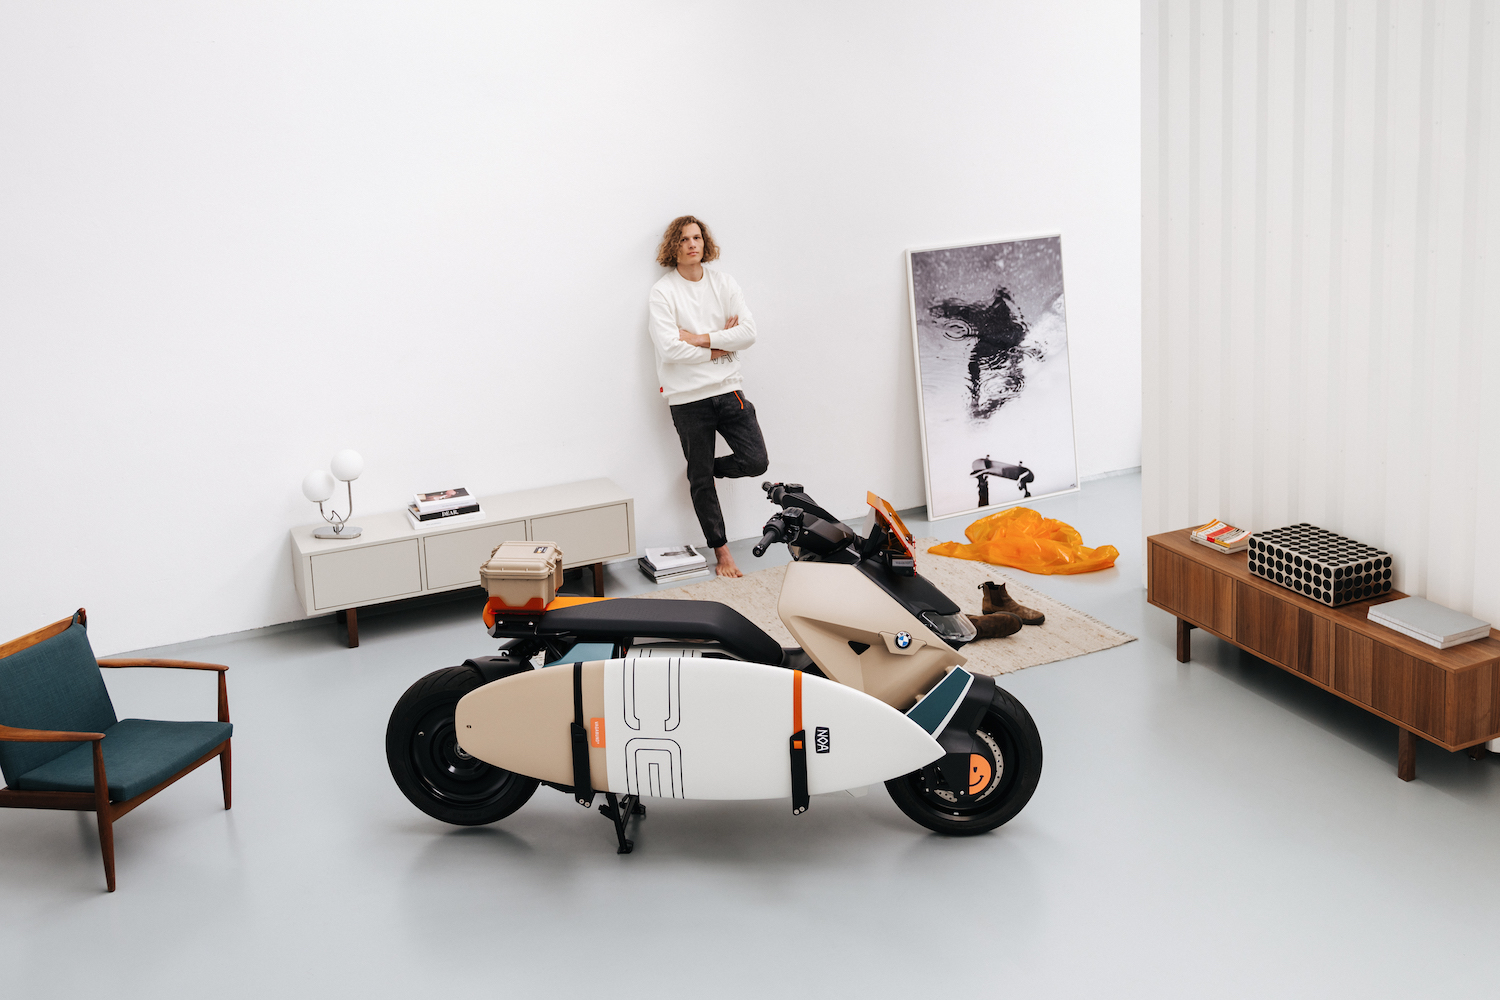 BMW CE 04 Vagabund Moto Concept parked in front of furniture in a studio with a man looking at the scooter.